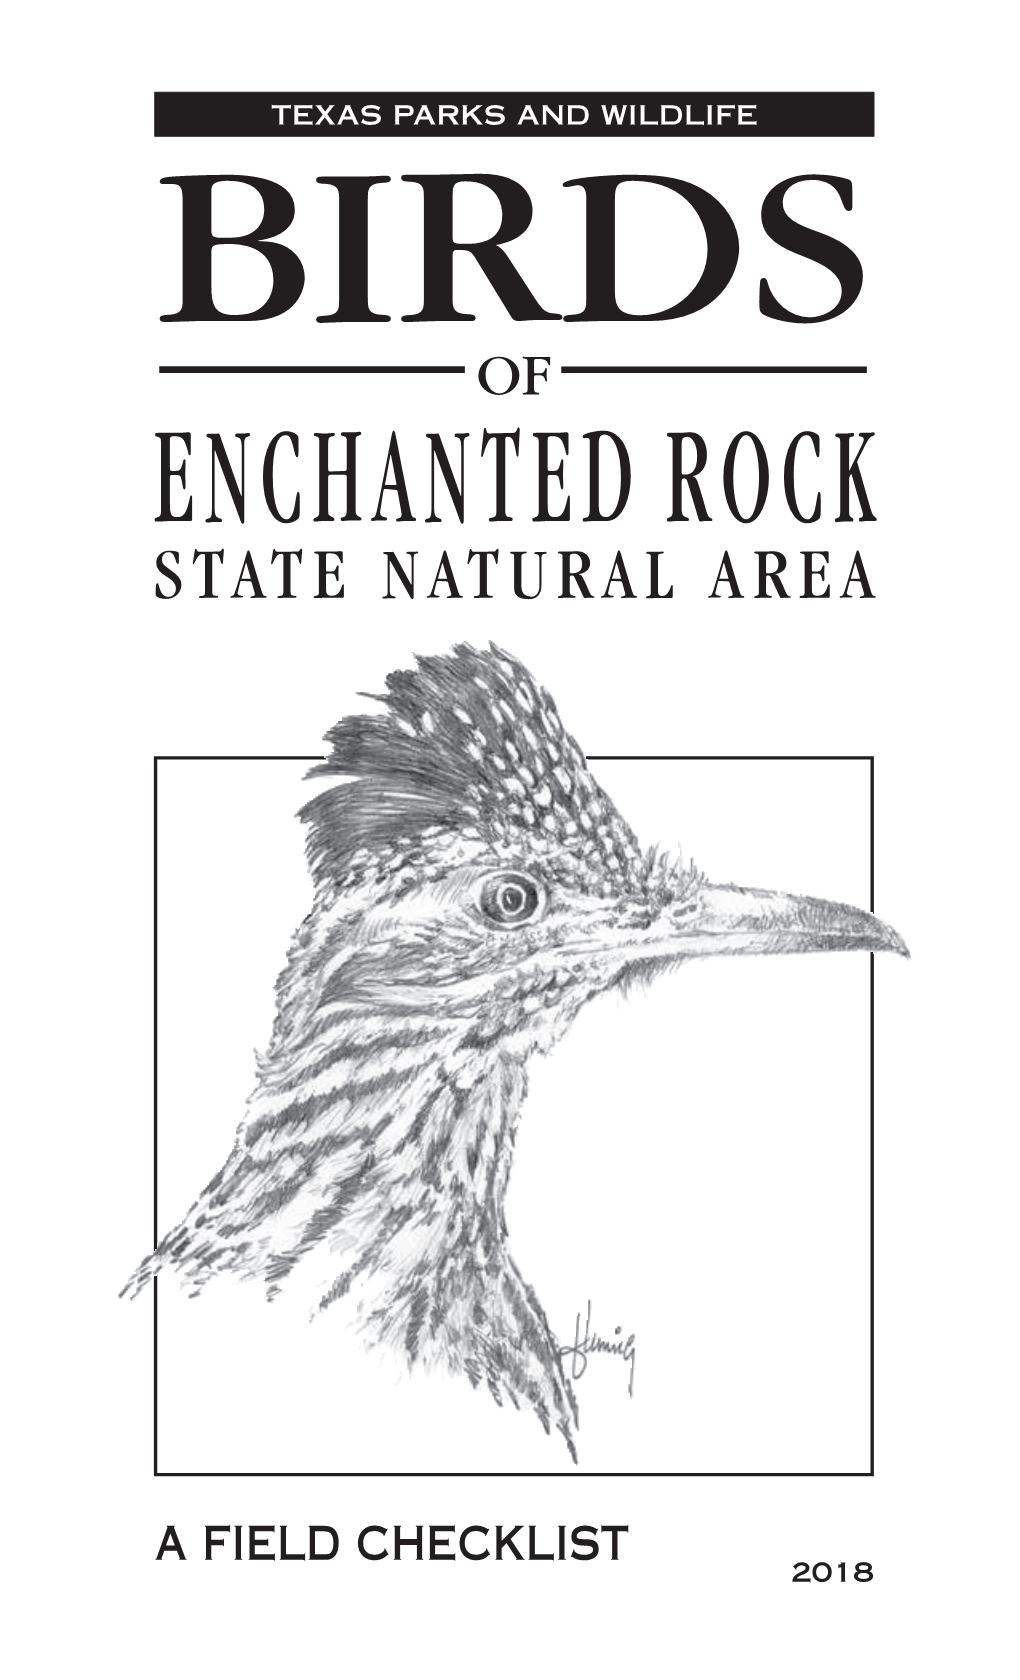 Birds of Enchanted Rock State Natural Area